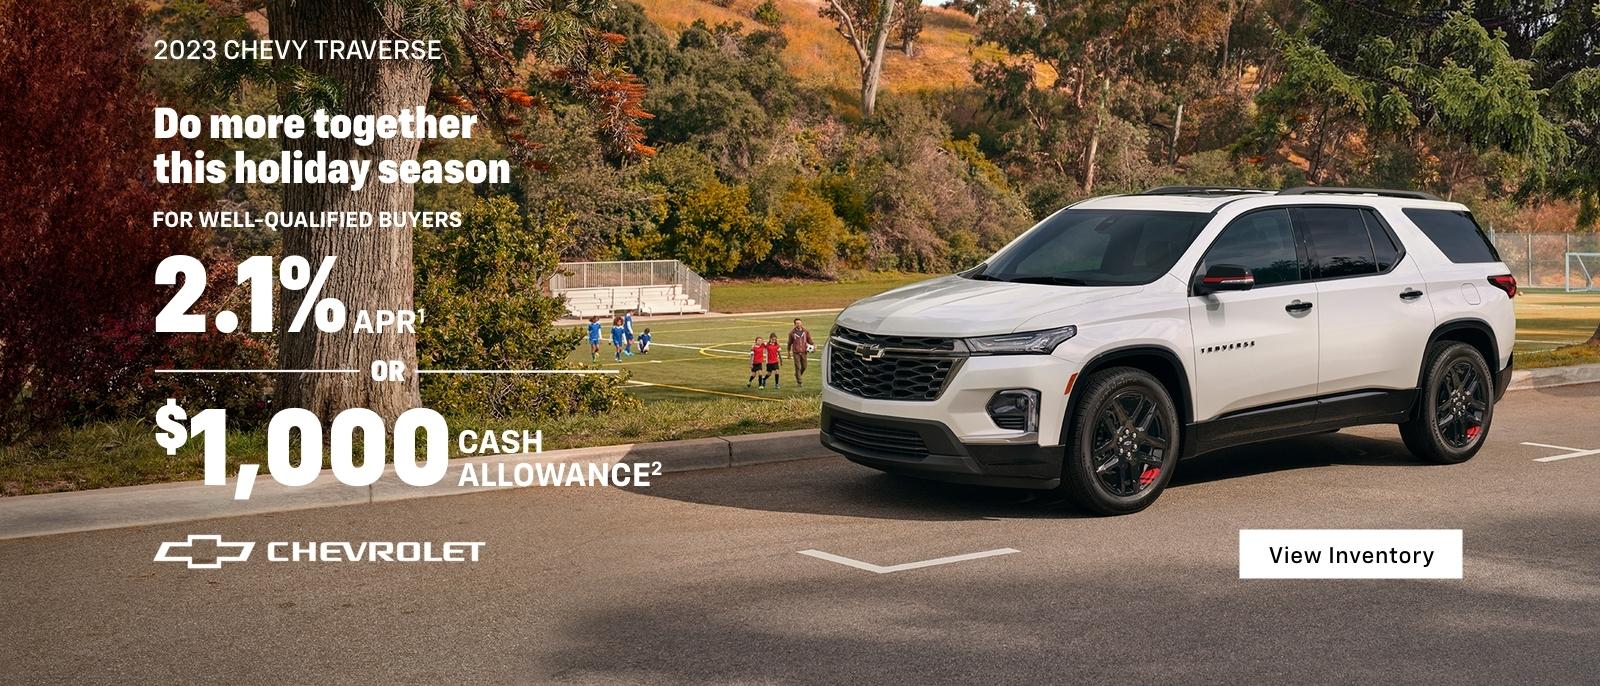 2023 Chevy Traverse. Style that moves you. For well-qualified buyers 2.1% APR. Or, $1,000 cash allowance.